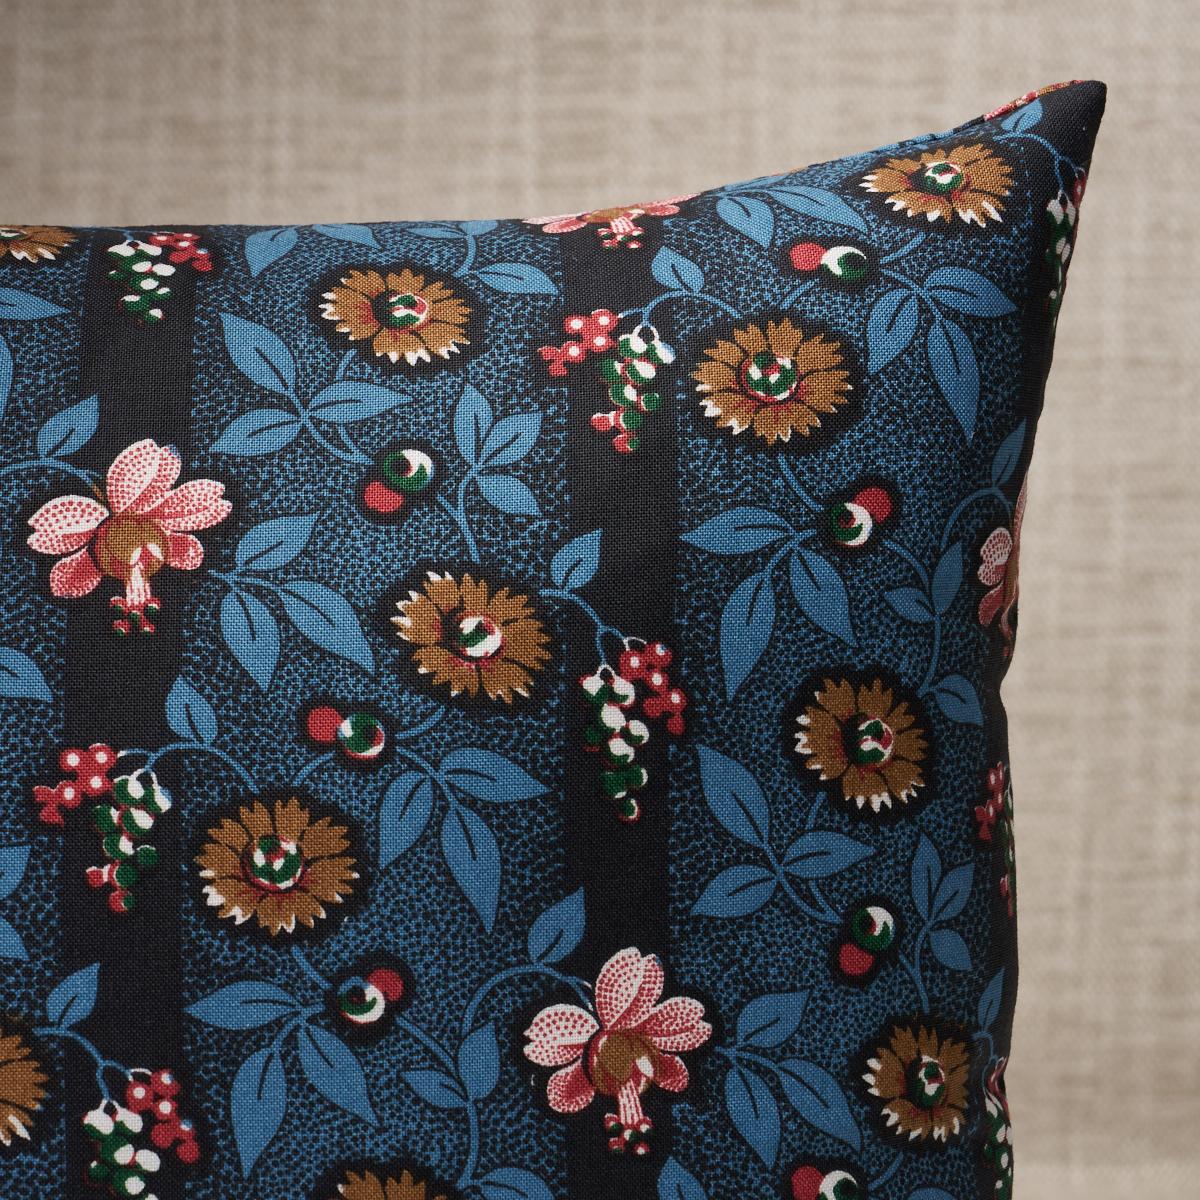 This pillow features LaRue Stripe with a knife edge finish. Inspired by an antique fabric, this layered floral stripe is printed on a crisp cotton ground. Pillow includes a feather/down fill insert and hidden zipper closure.